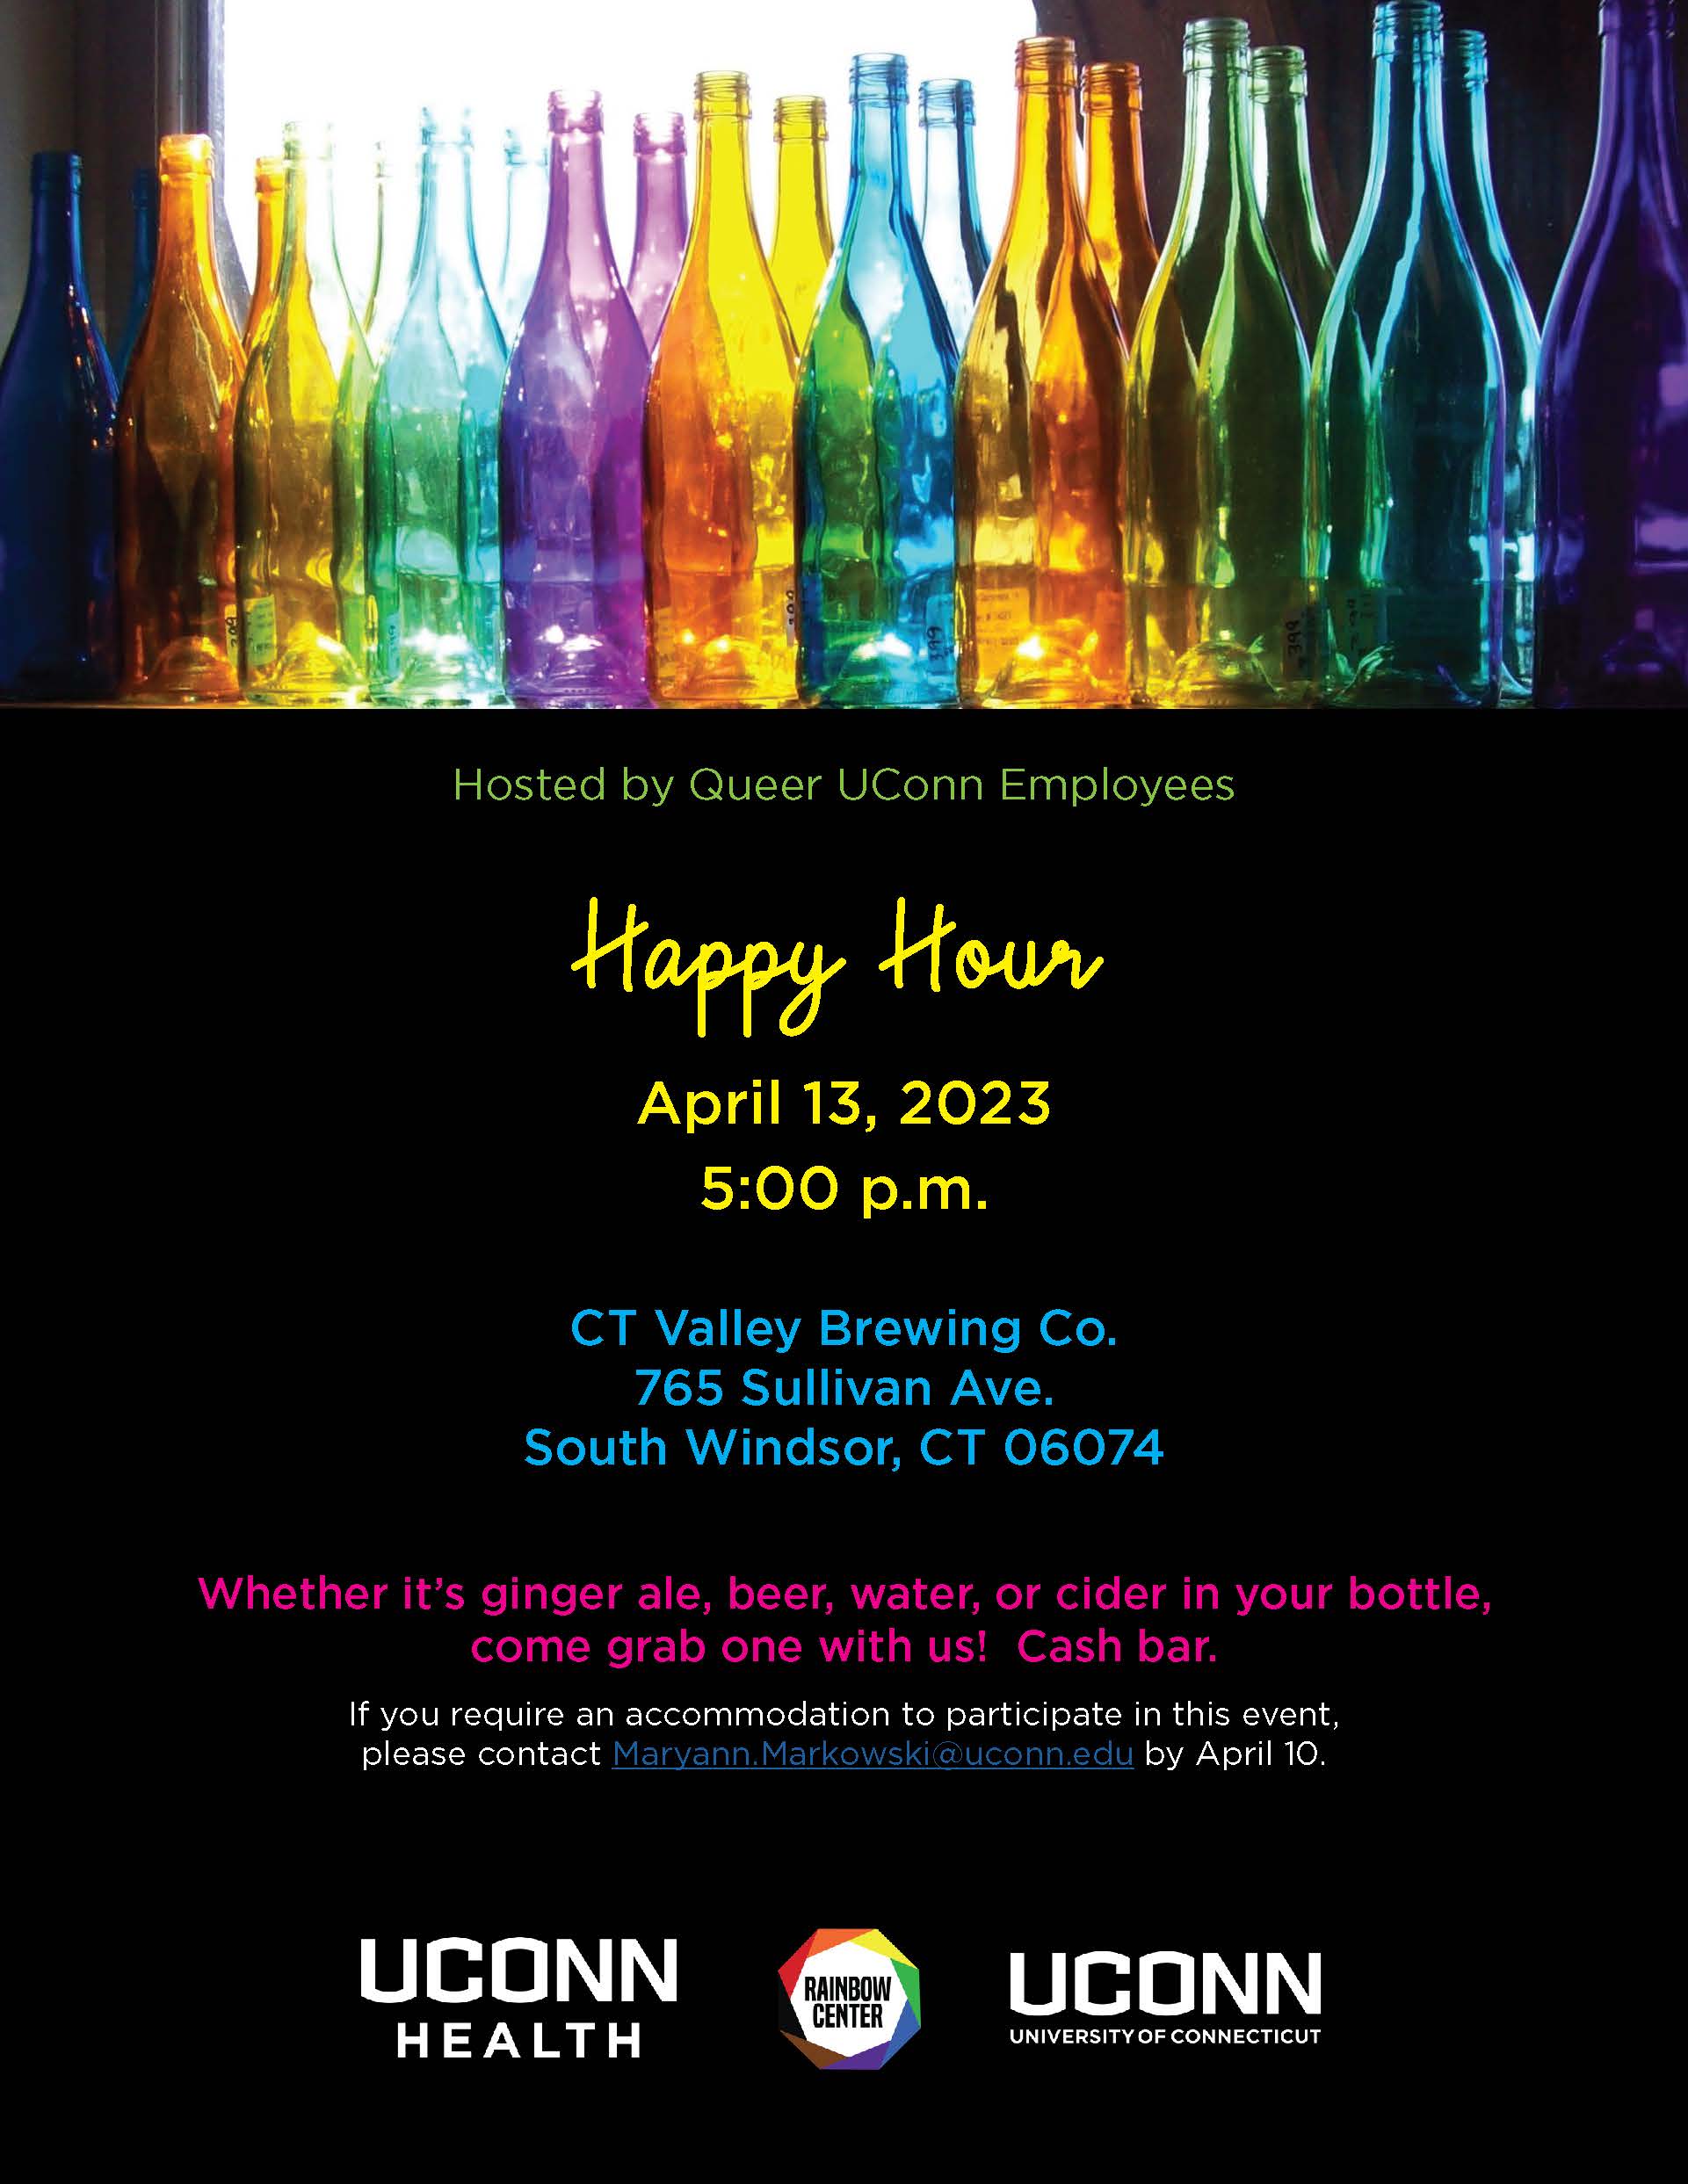 Image button to PDF flyer for April 13, 2023 happy hour